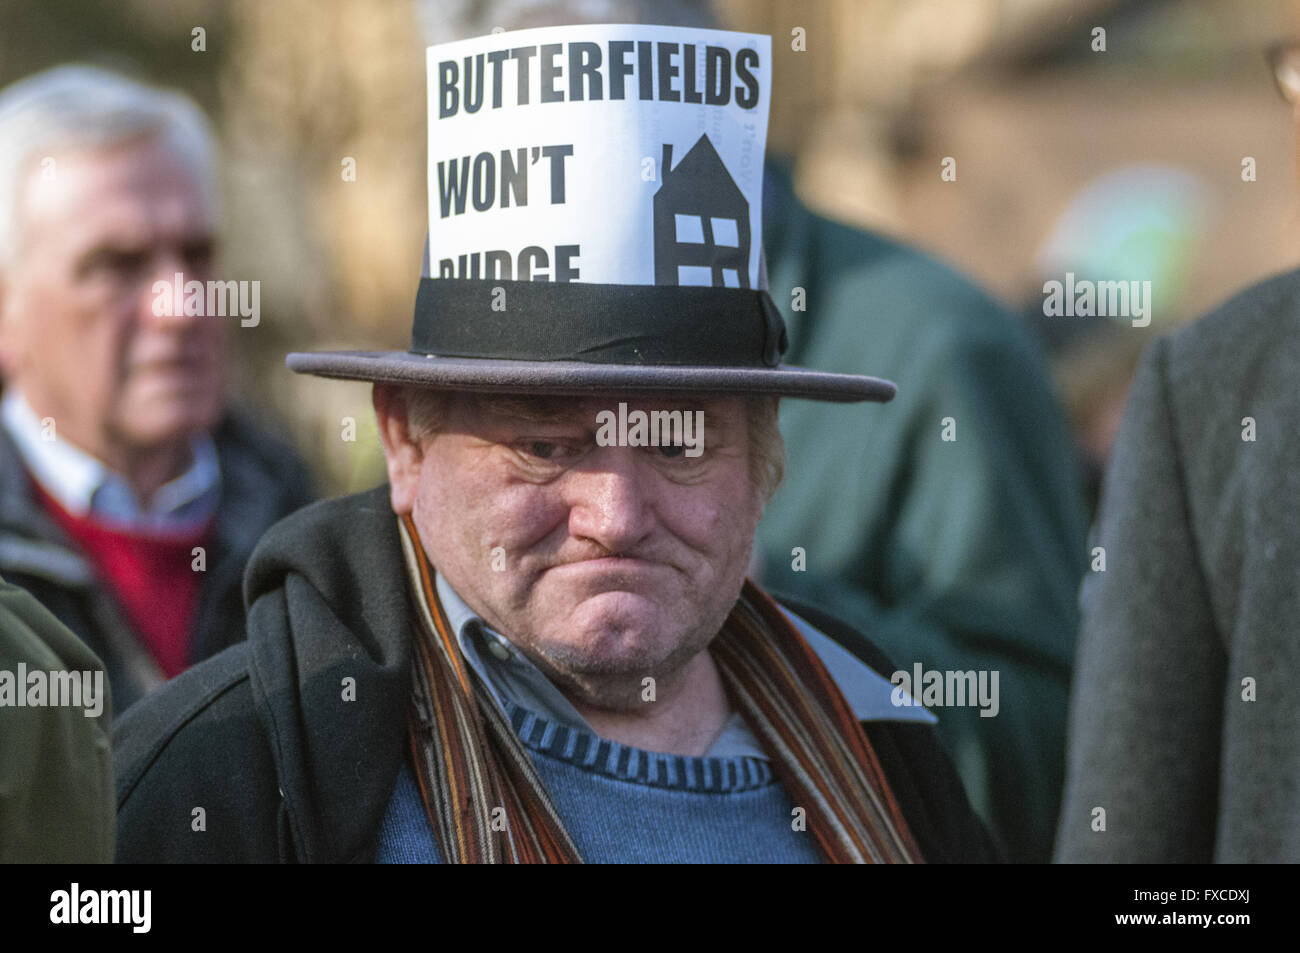 Protesters met in Lincoln Inn fields to march to the Houses of Parliament and demand better homes for Londoners, to Kill the Housing and Planning Bill, and an end to the housing crisis  Featuring: Butterfield Estate resident Where: London, United Kingdom Stock Photo